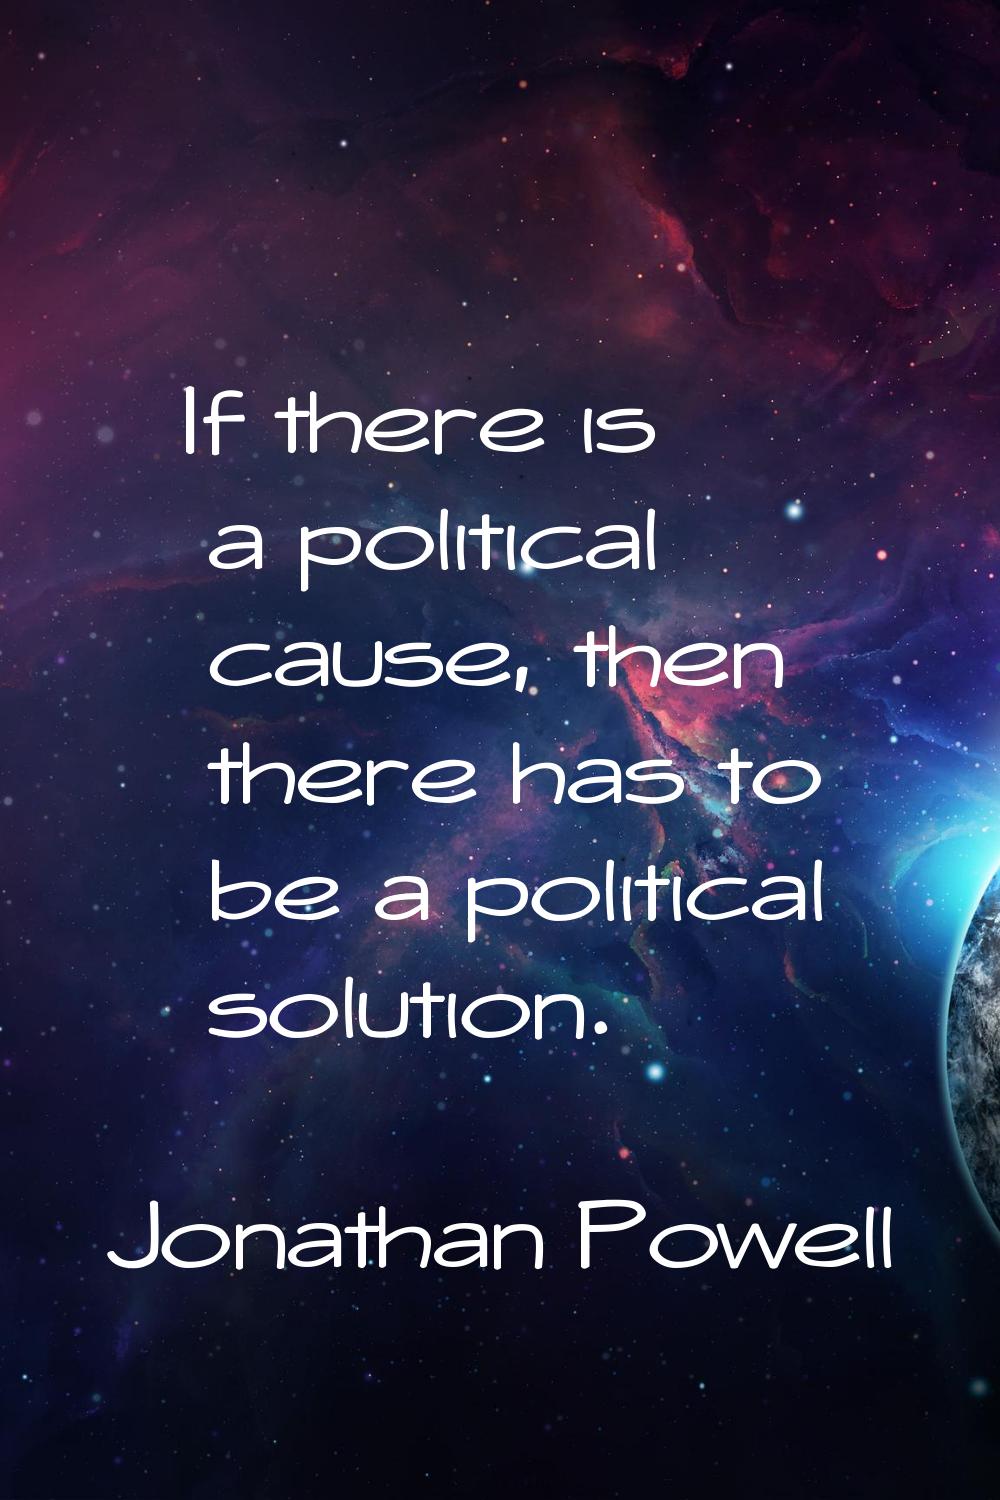 If there is a political cause, then there has to be a political solution.